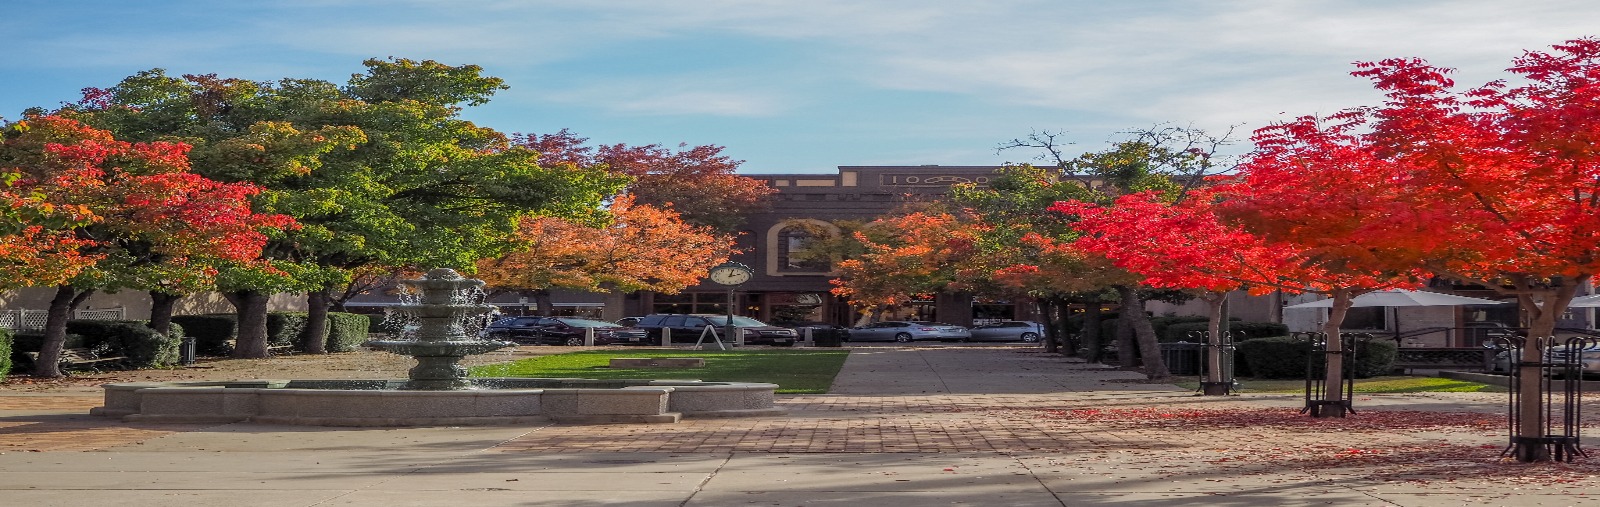 image of a plaza in fall 